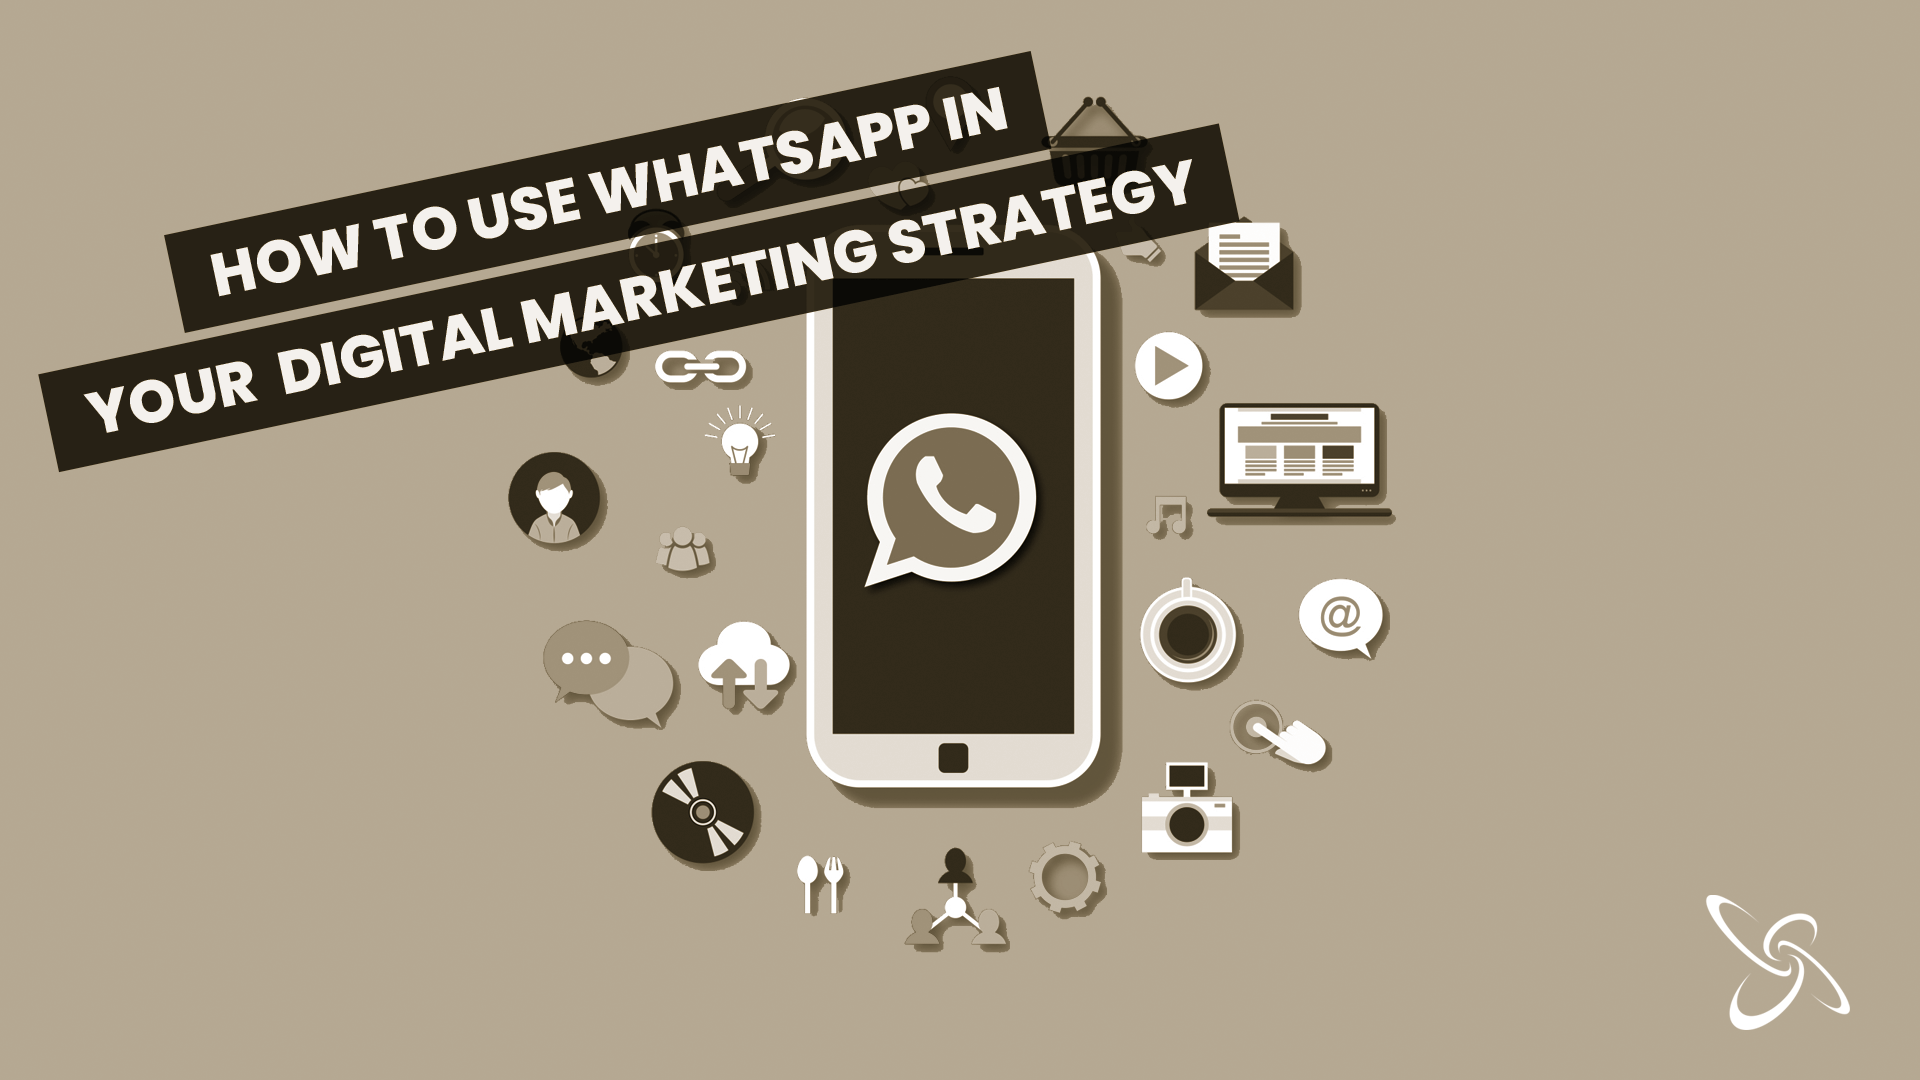 how to use whatsapp in your digital marketing strategy